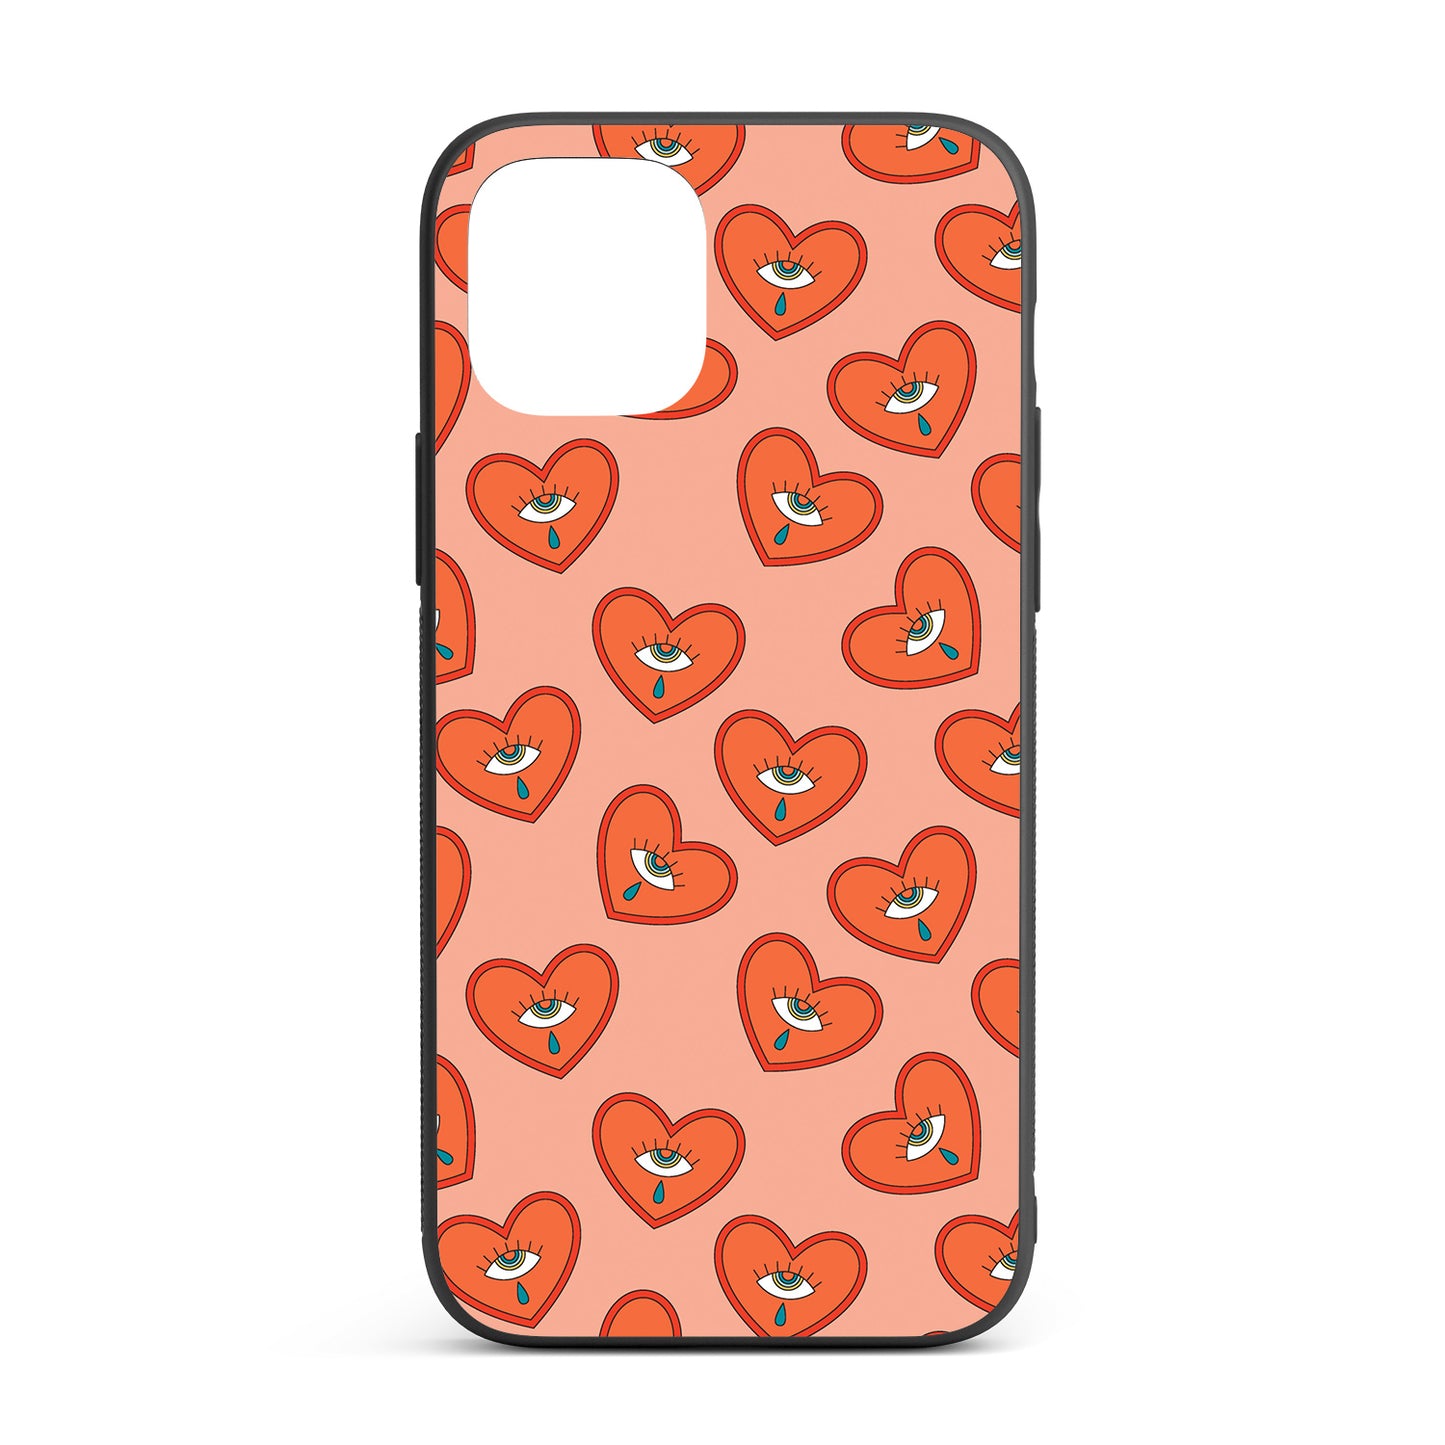 Psychedelic Heart iPhone glass case